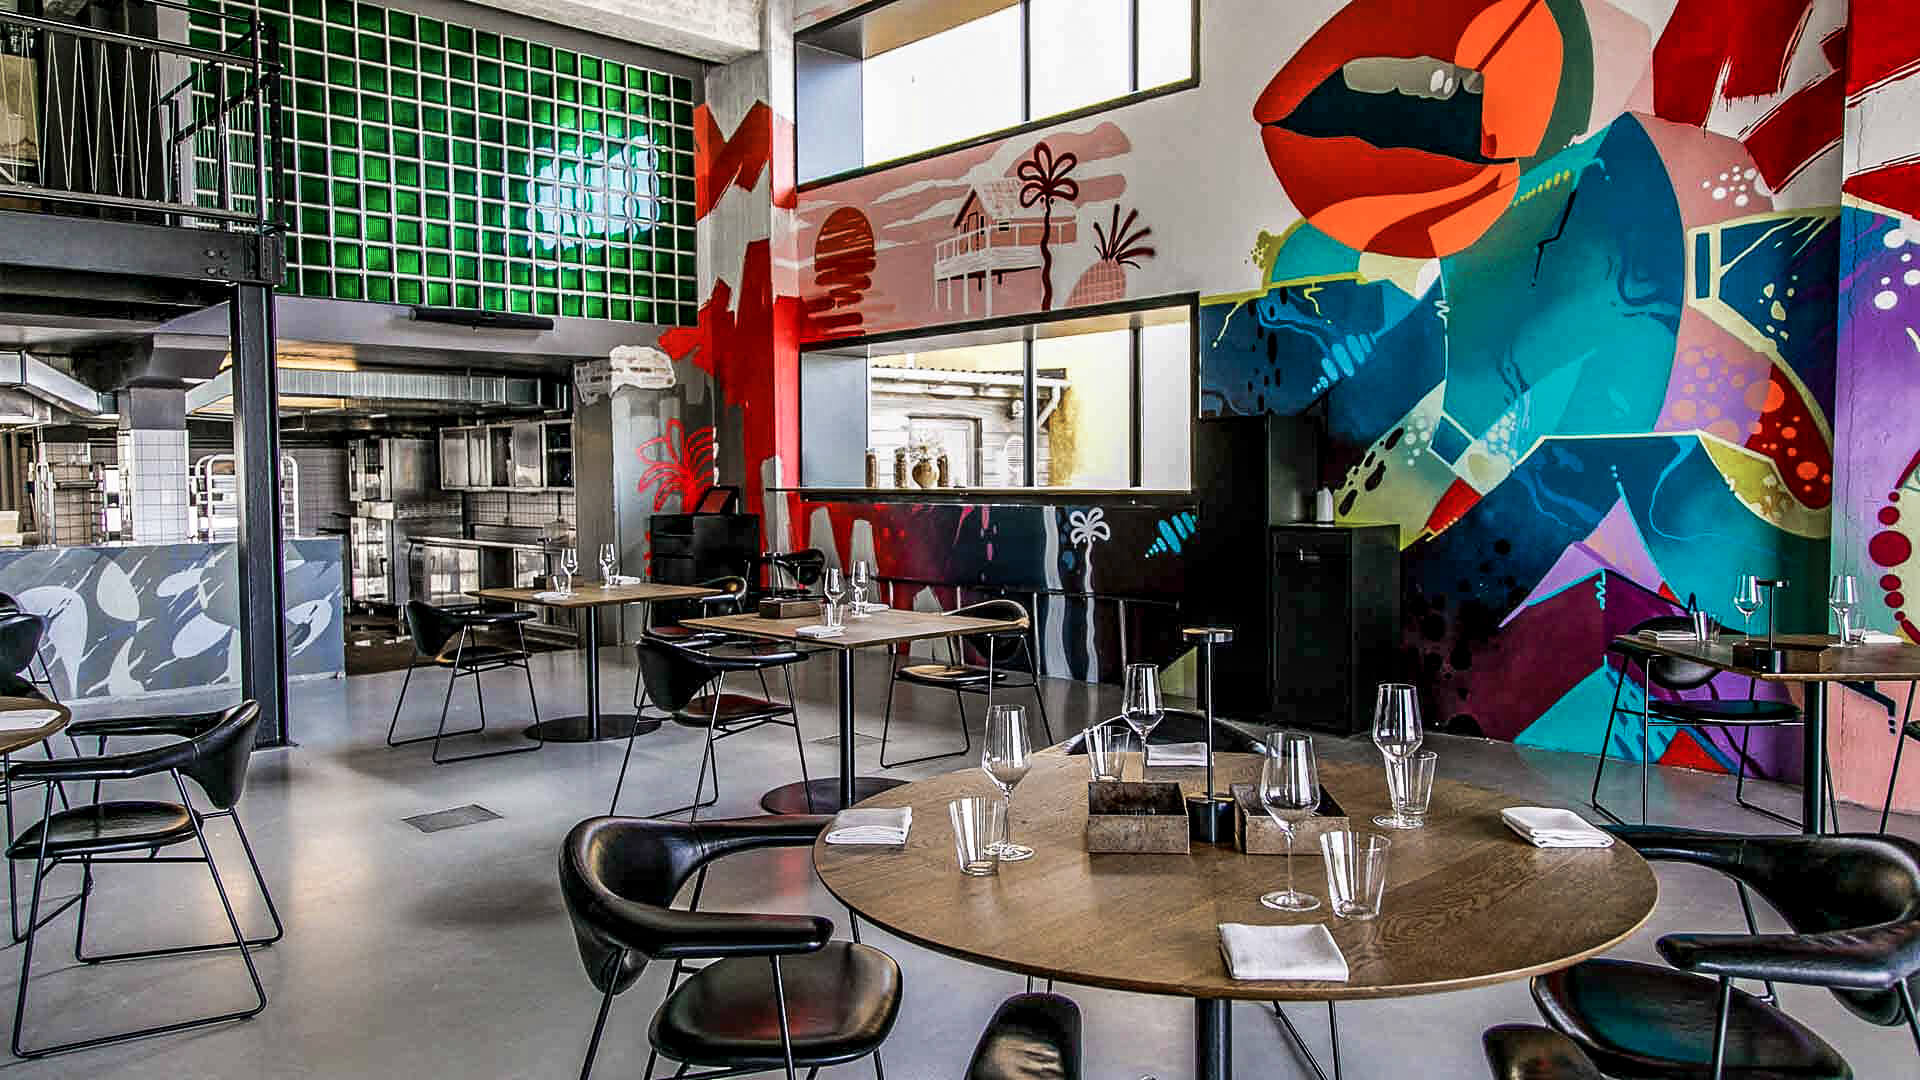 Inside, Amass offers a combination of elevated simplicity, rough concrete and colorful graffiti.